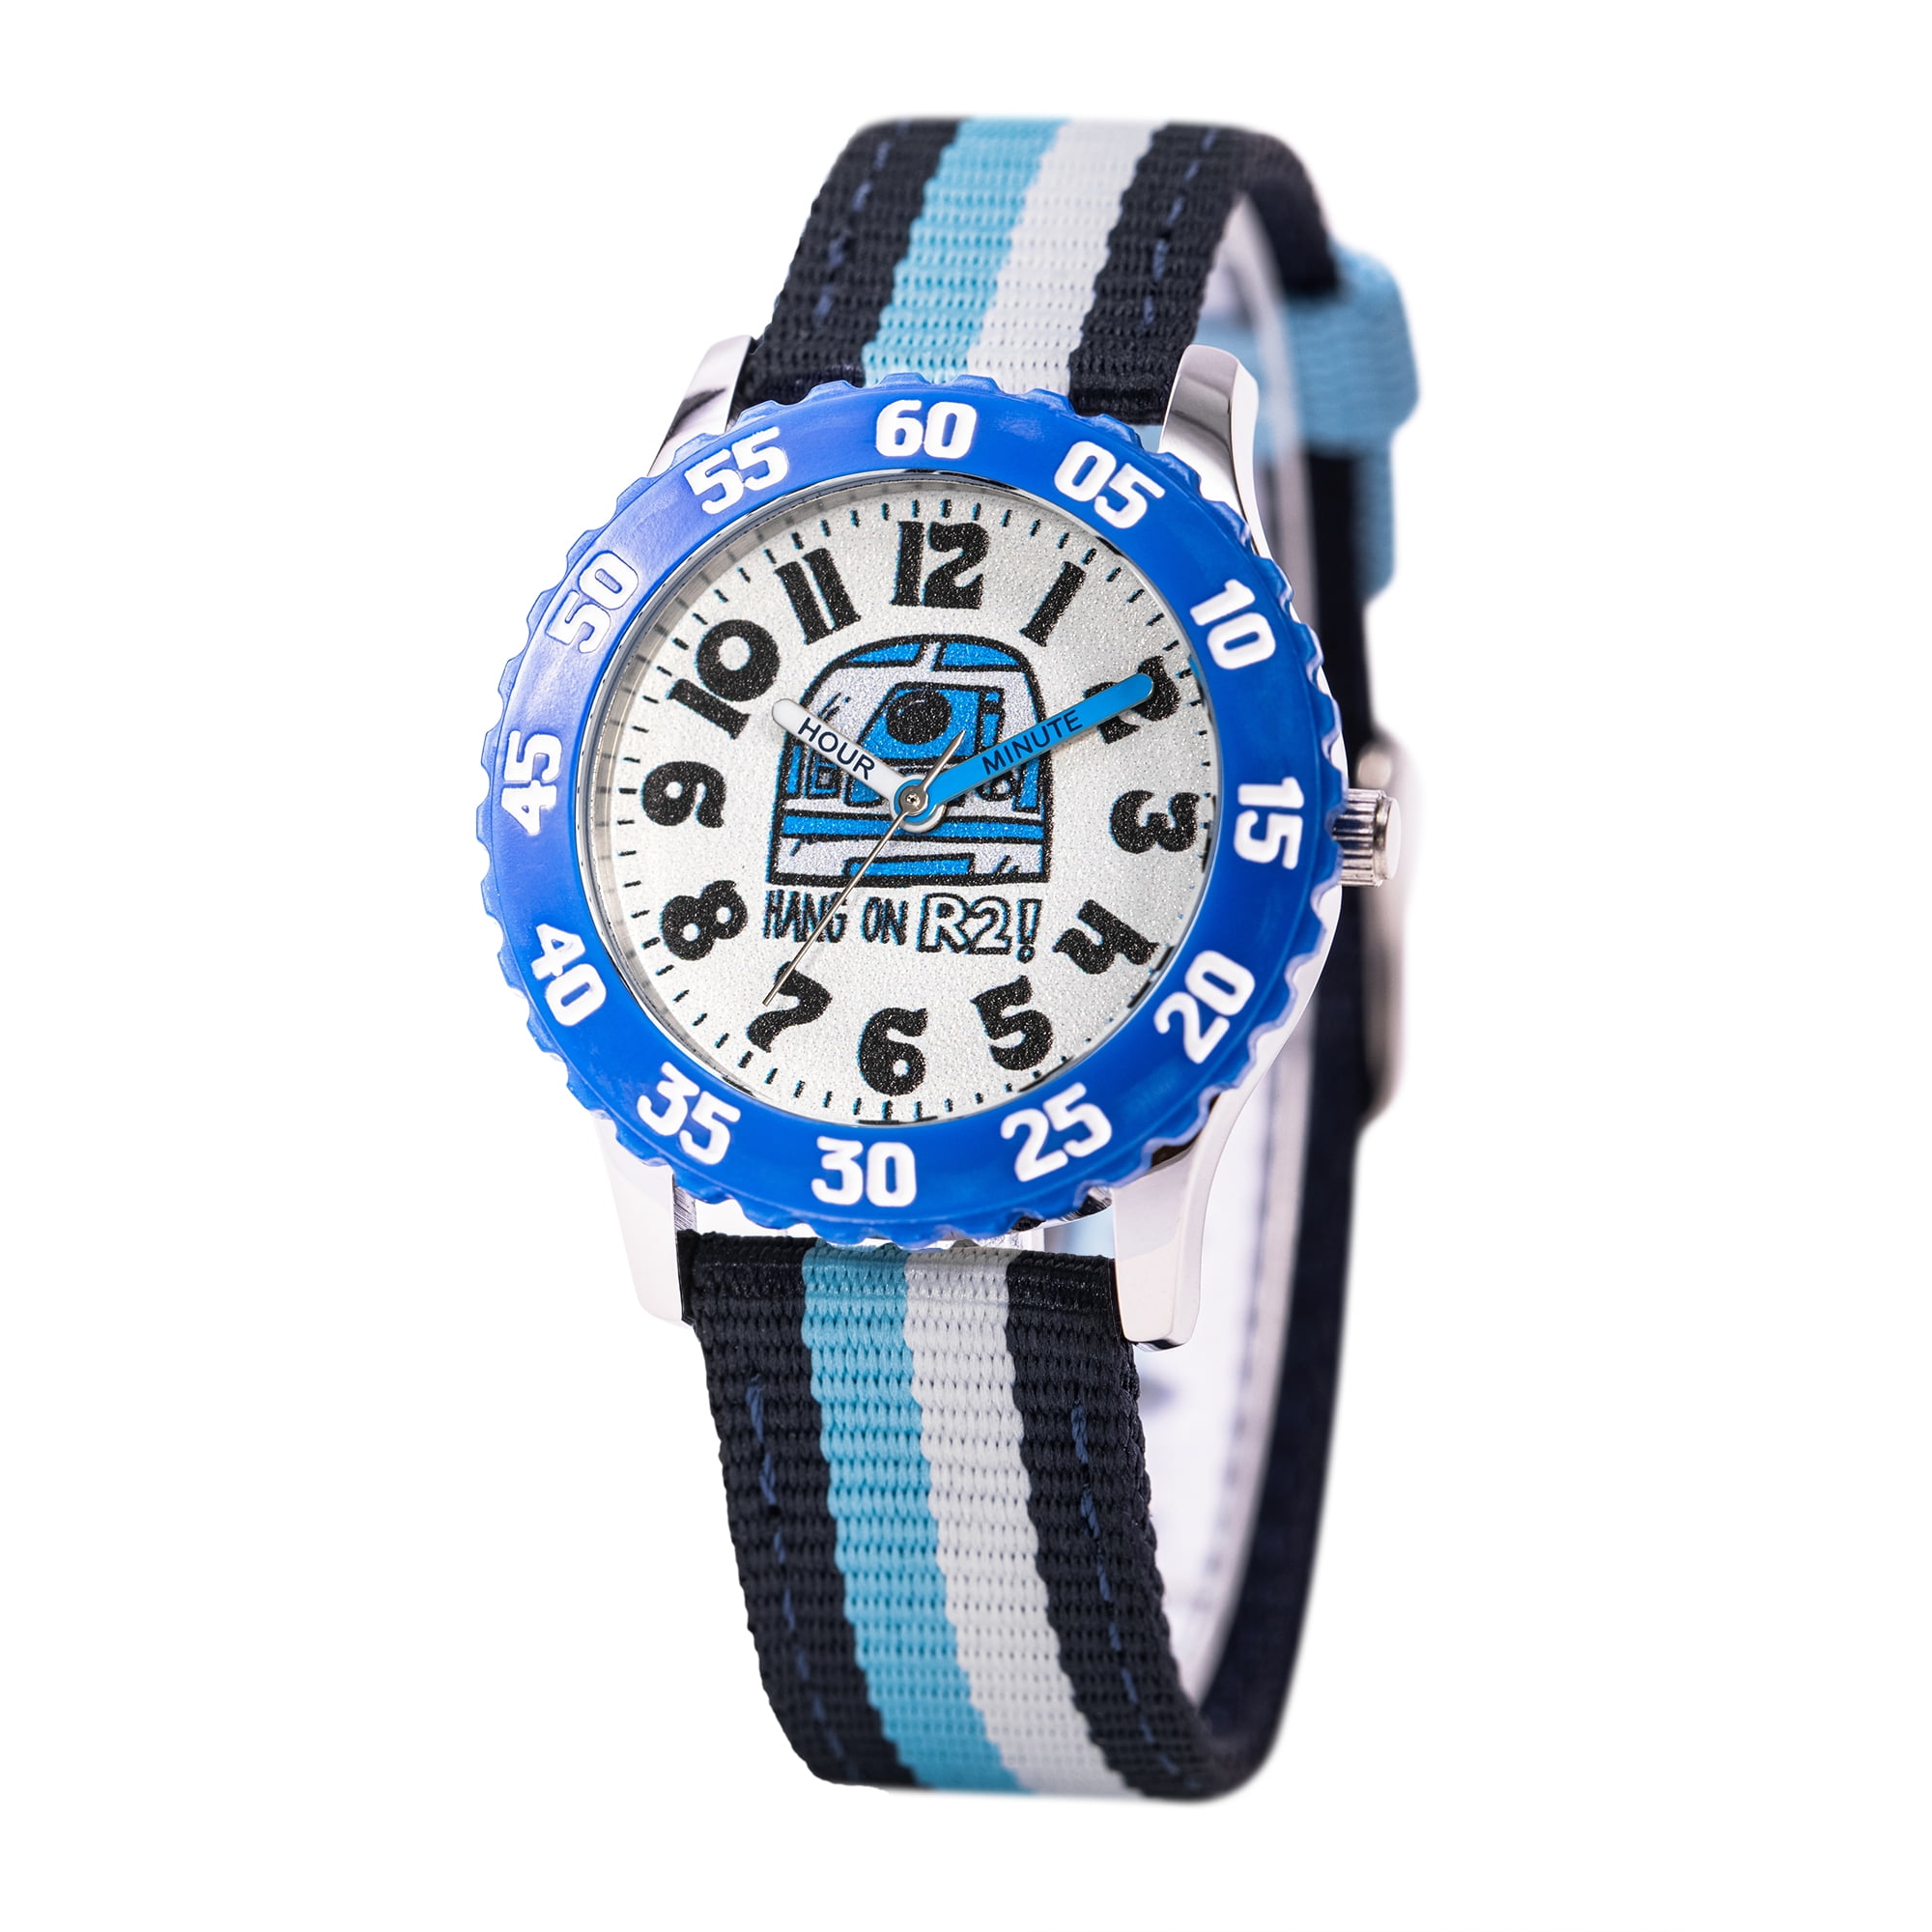 Star Wars x Fossil - R2-D2 Automatic Stainless Steel Watch Limited Edition  | eBay